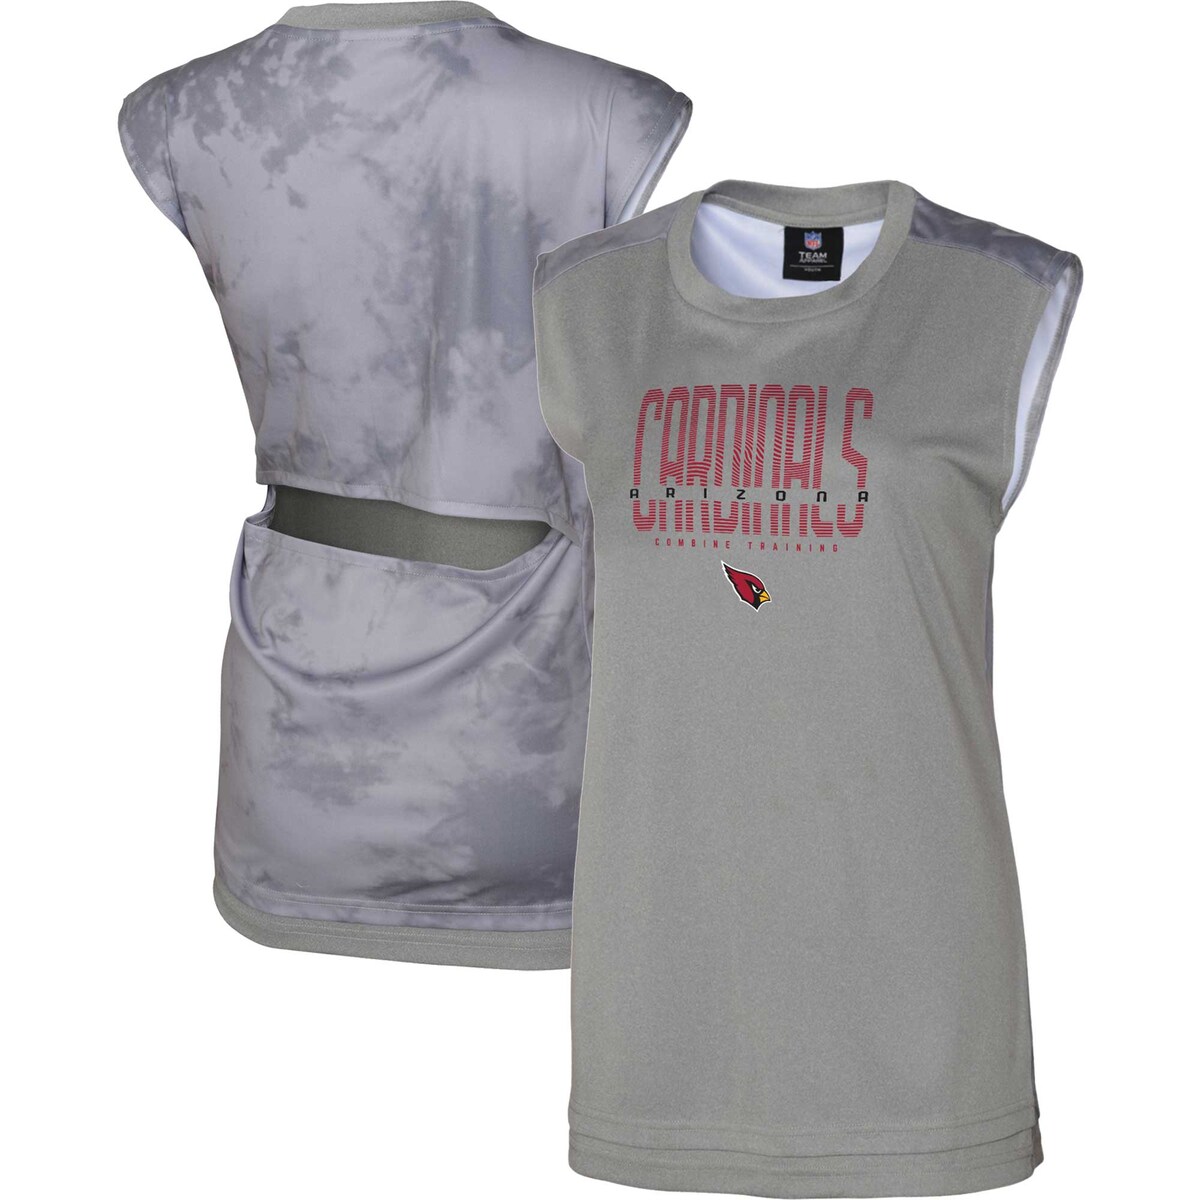 Enjoy a one-of-a-kind display of your love for the Arizona Cardinals by adding this No Sweat tank top to your team gear collection. It features a neutral color up front along with a dyed back pattern that turns heads for all the right reasons. The Arizona Cardinals logo printed on the front leaves no doubt who your favorites are, while the back cutout gives this top a chic touch, making it a fitting grab for a sunny game day.Screen print graphicsMachine wash with garment inside out, tumble dry lowCrew neckMaterial: 100% PolyesterOfficially licensedSleevelessSide split hemTie-dye pattern may varyImportedBrand: OuterstuffDroptailBack cutout